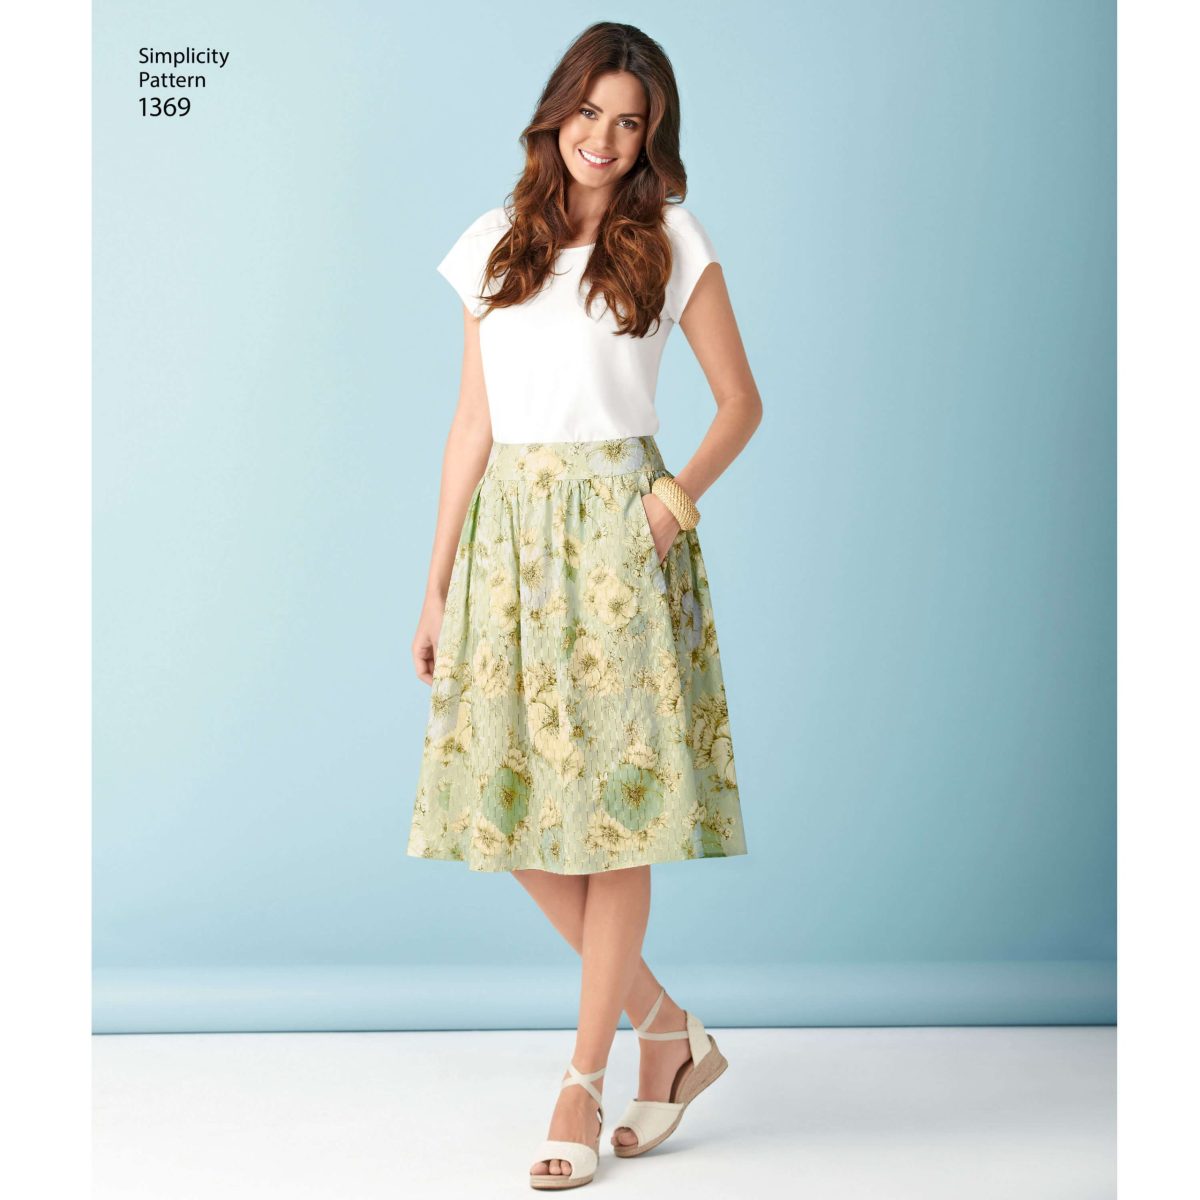 Simplicity Sewing Pattern 1369 Misses' Skirts in Three Lengths